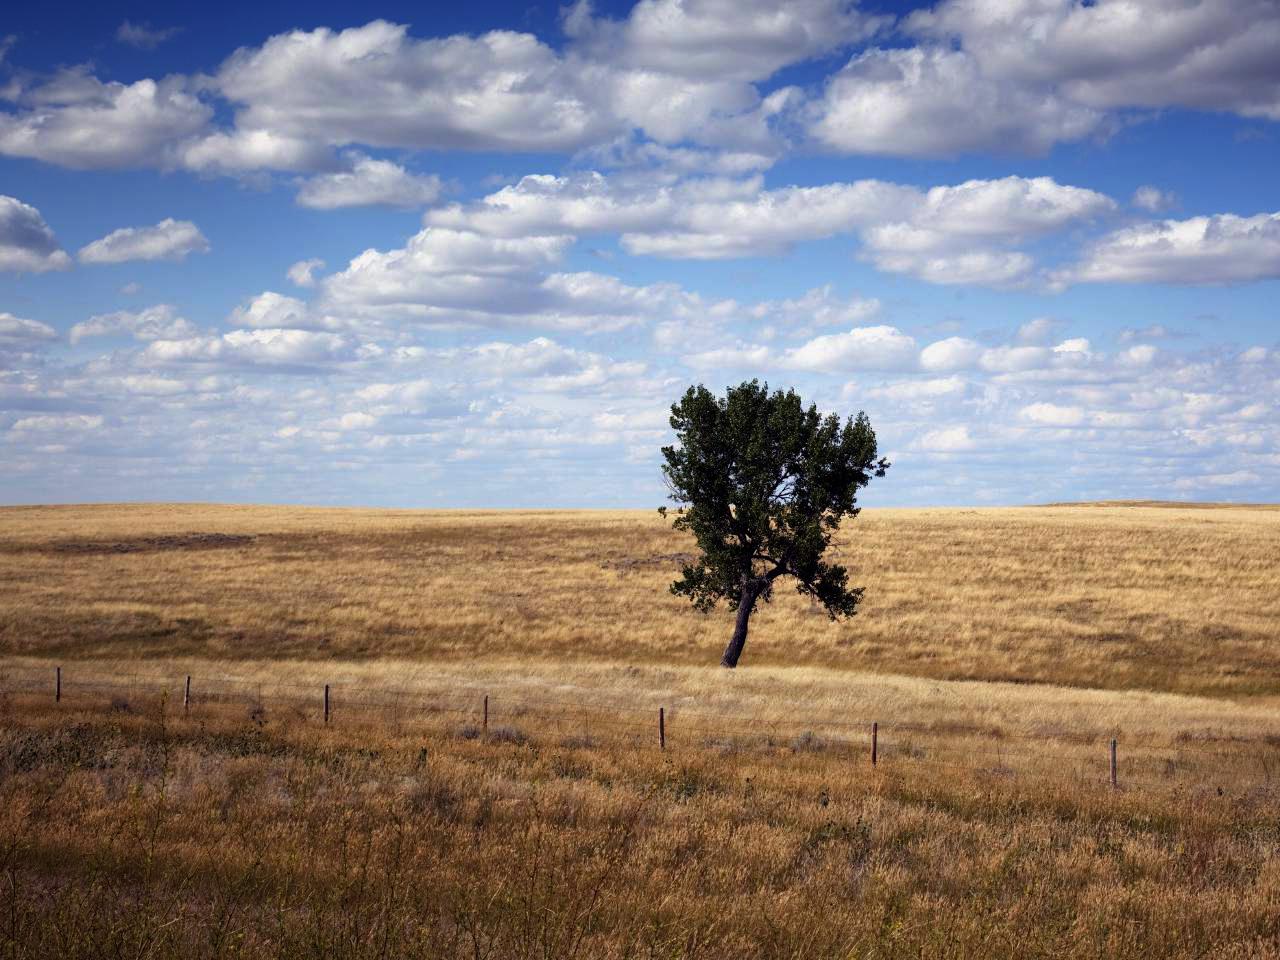 Brown grasslands receding into the horizon, with a single tree in the center of the frame.